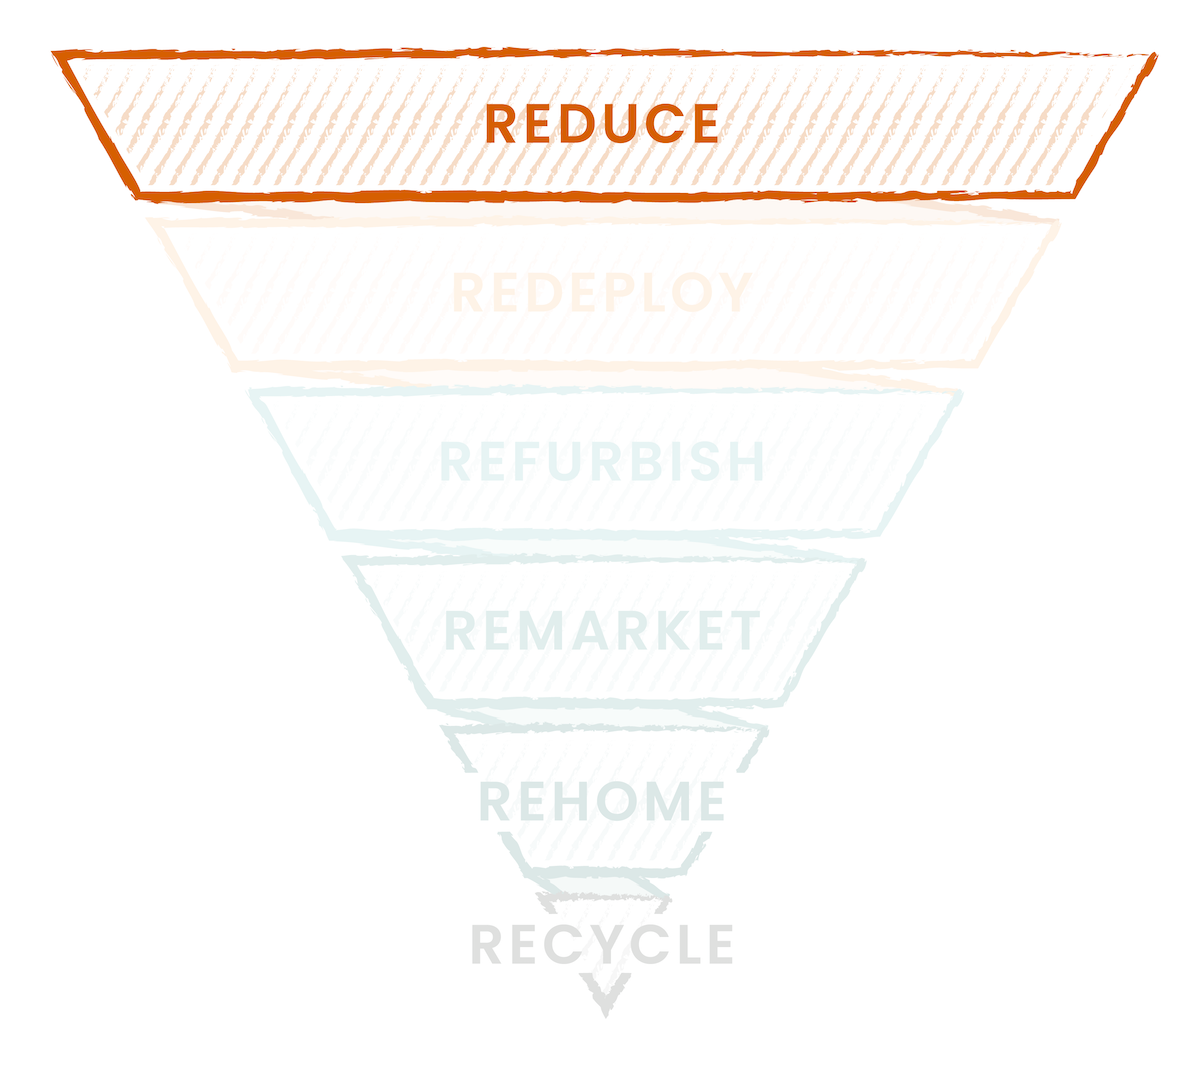 An image of an upside-down triangle shows the first layer of the technology recycle pyramid: “Reduce”